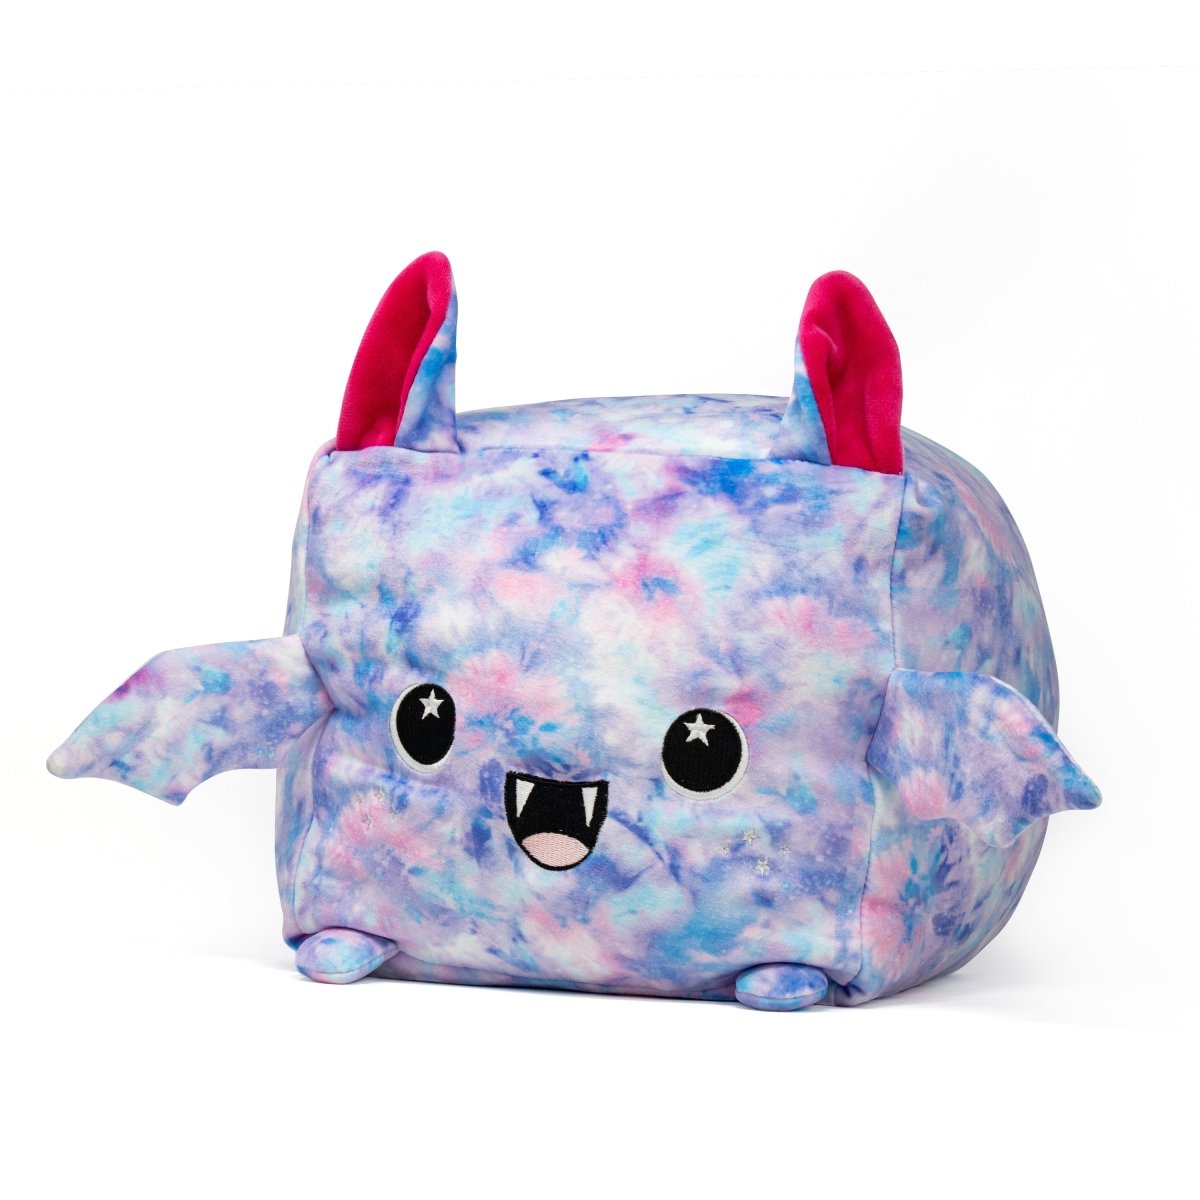 Lyra the Bat plush toy with tie-dye fur, little fangs, and vibrant wings from Moosh-Moosh SQUARED² Collection.